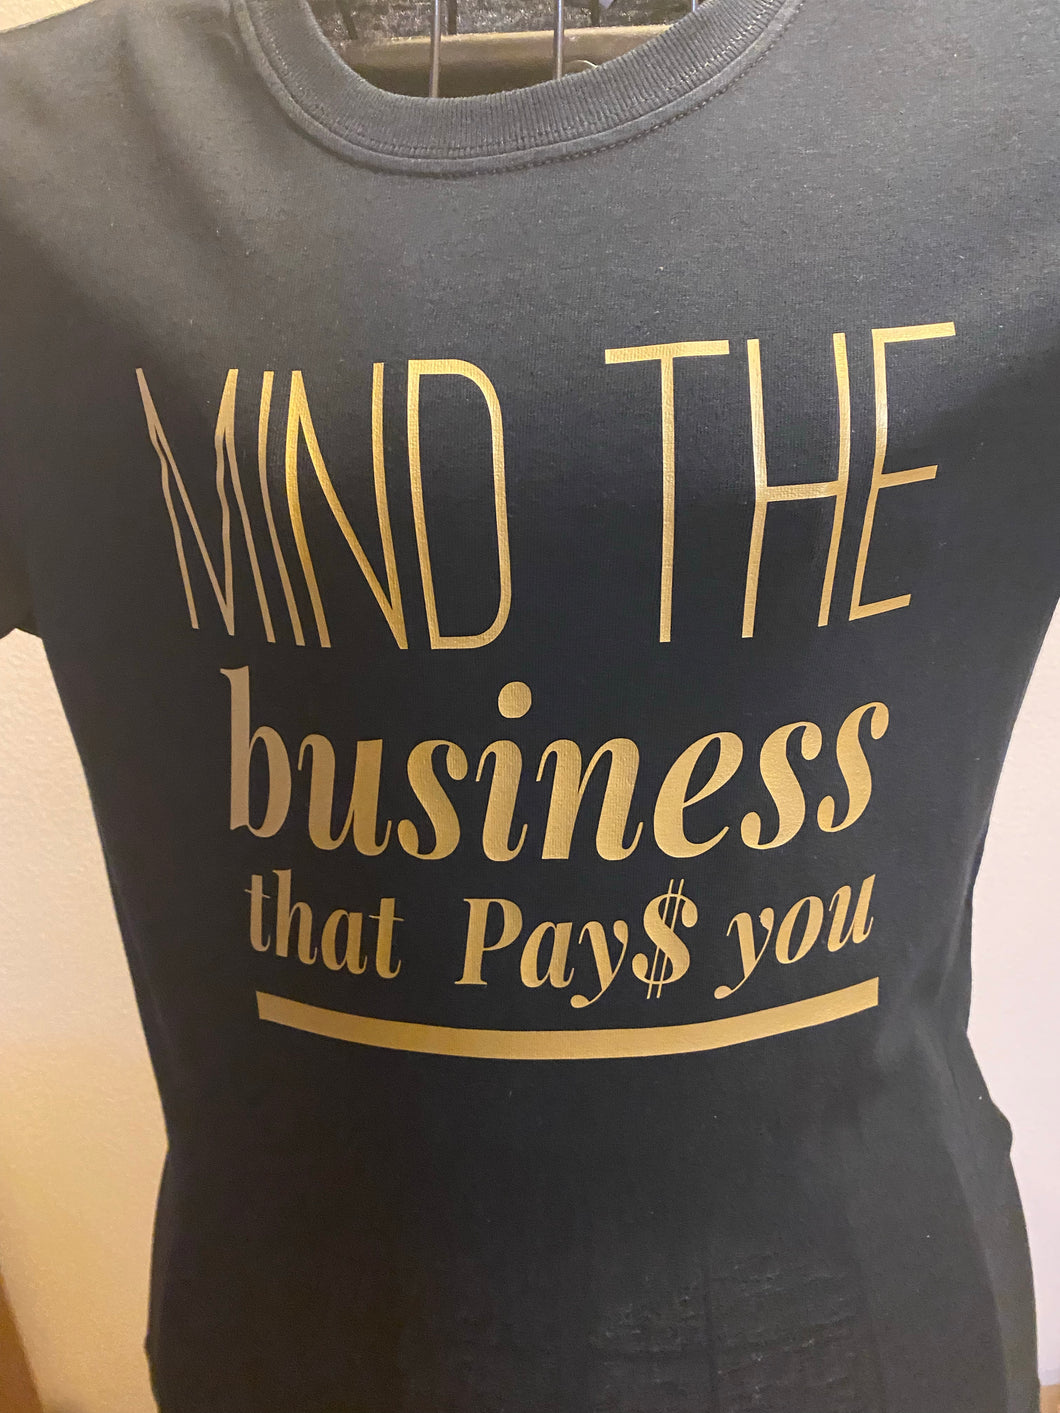 Mind The Business that pays you!